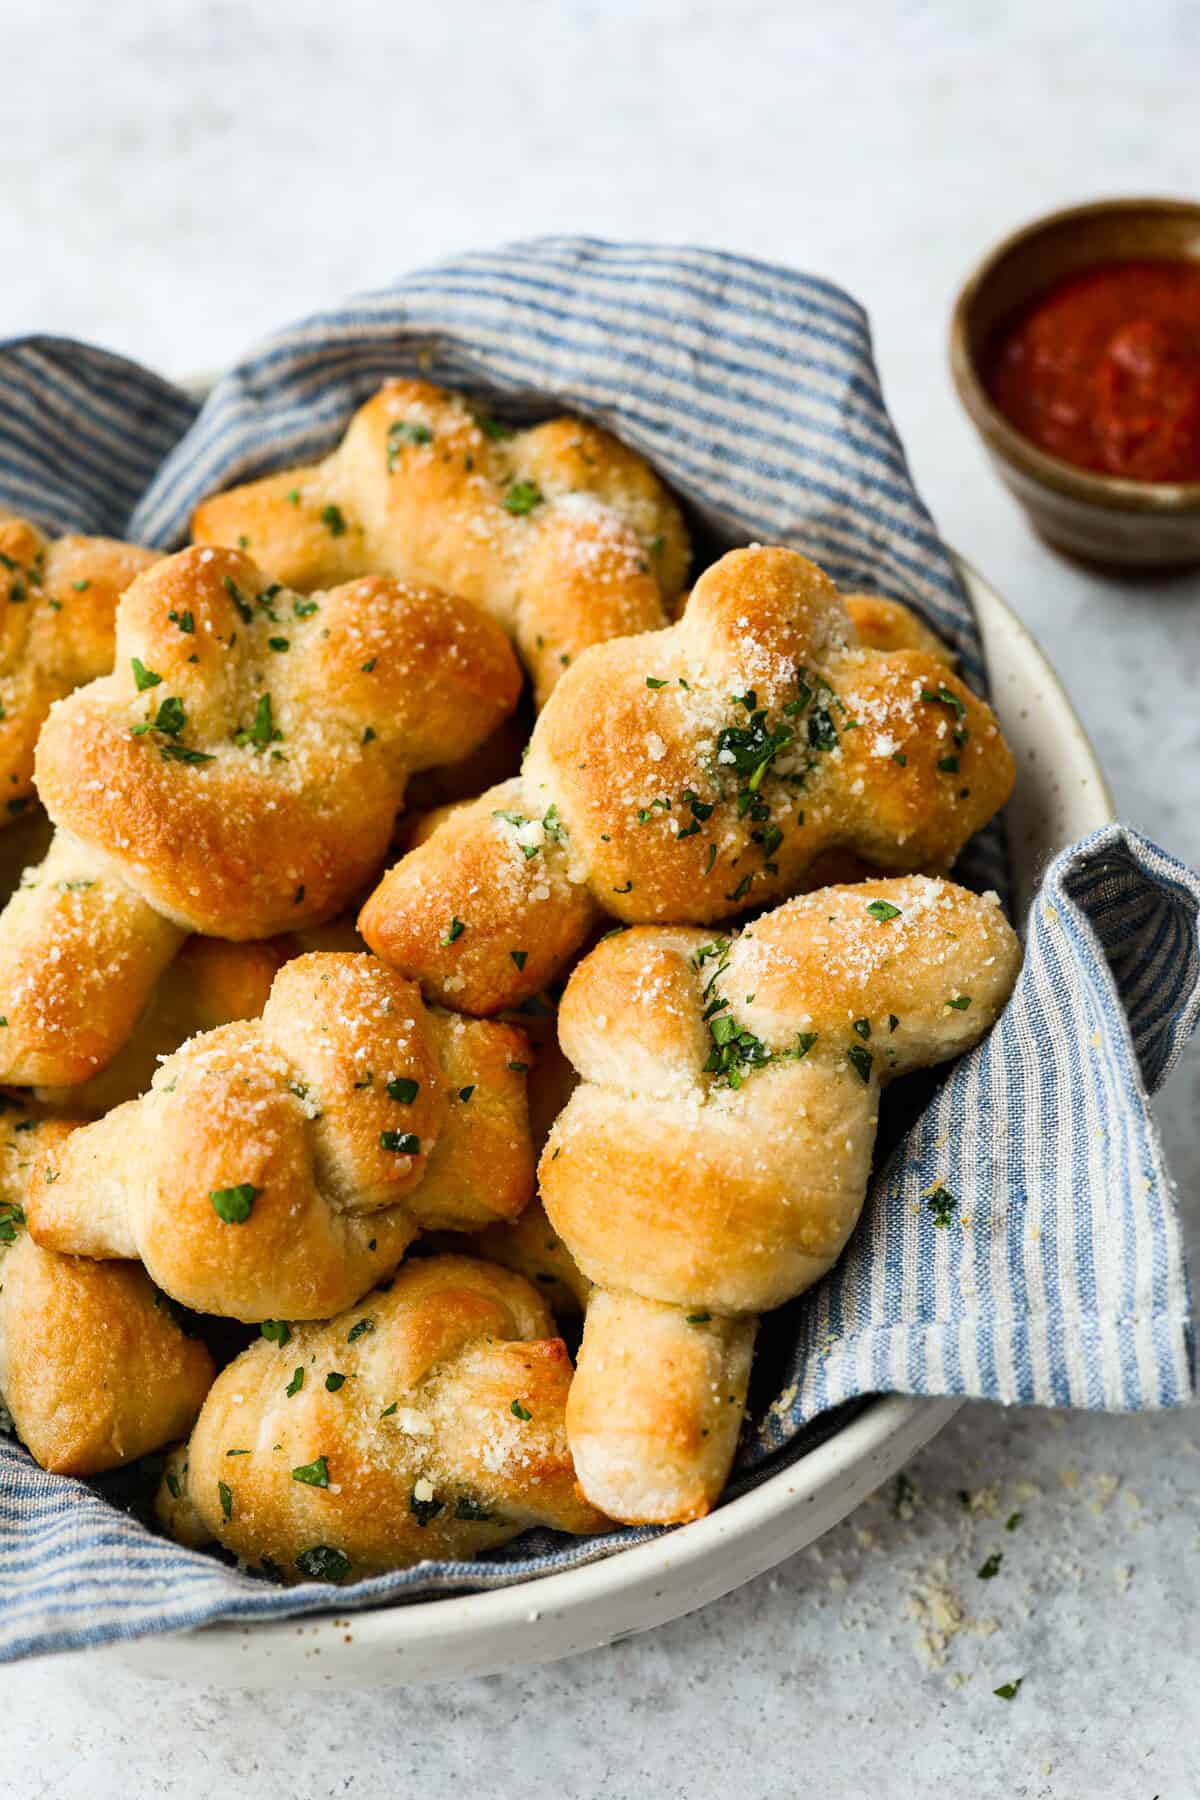 Selfmade Garlic Knots (Fast and Simple!)